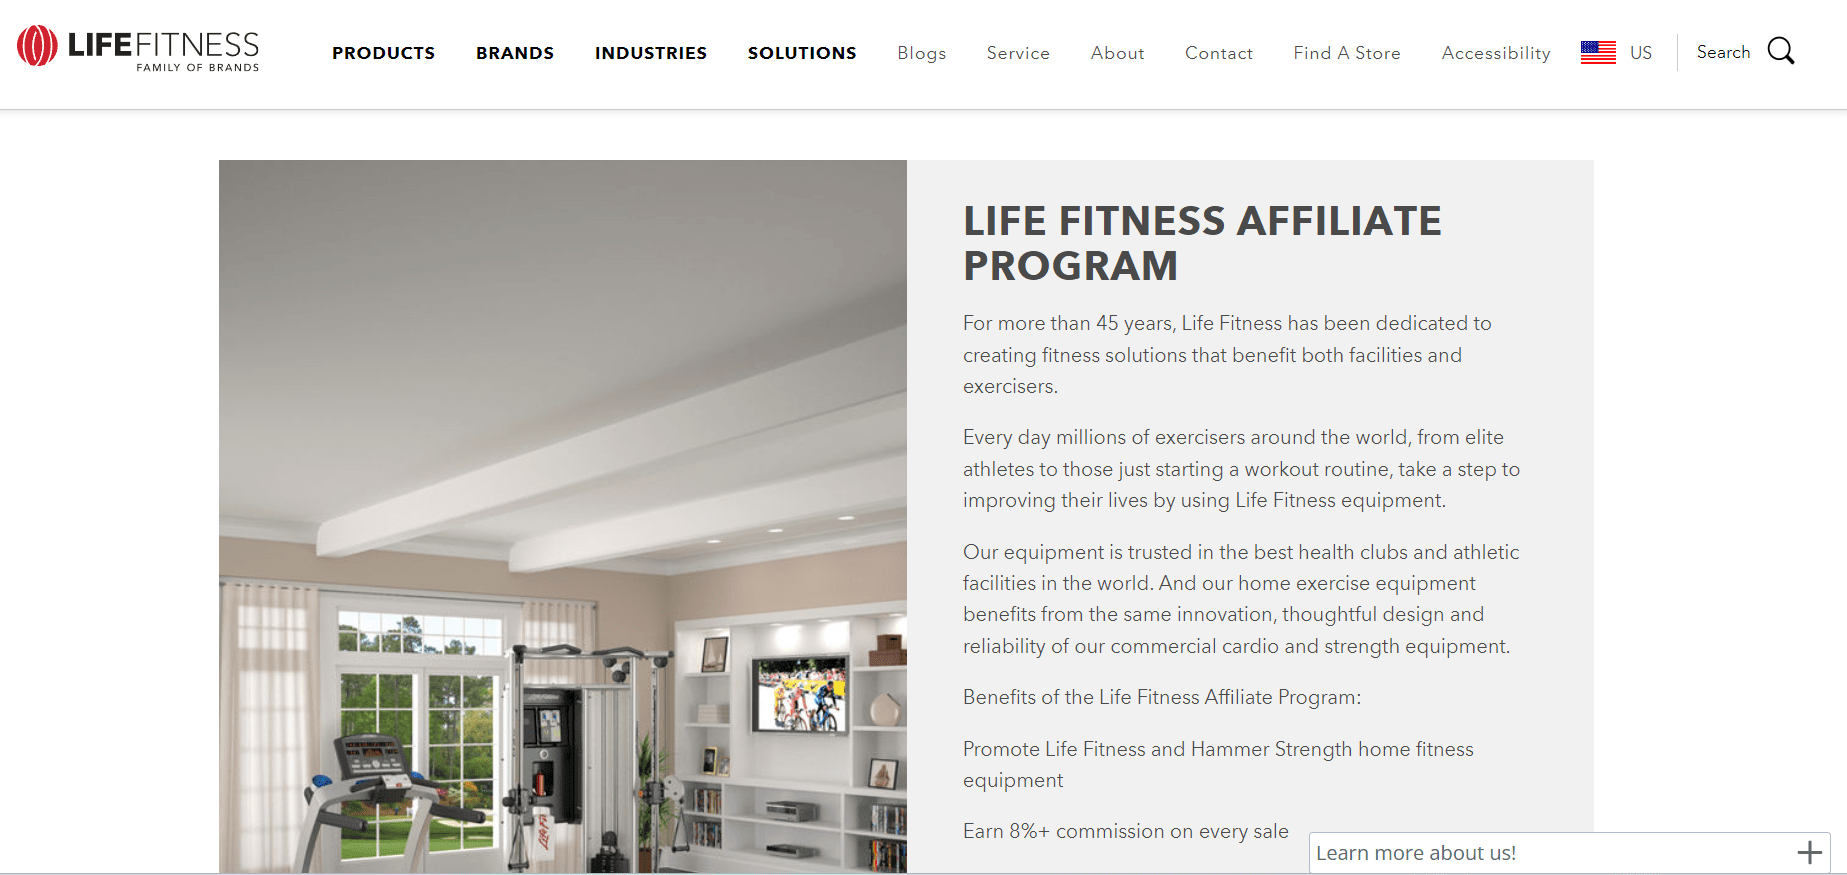 Life Fitness Overview